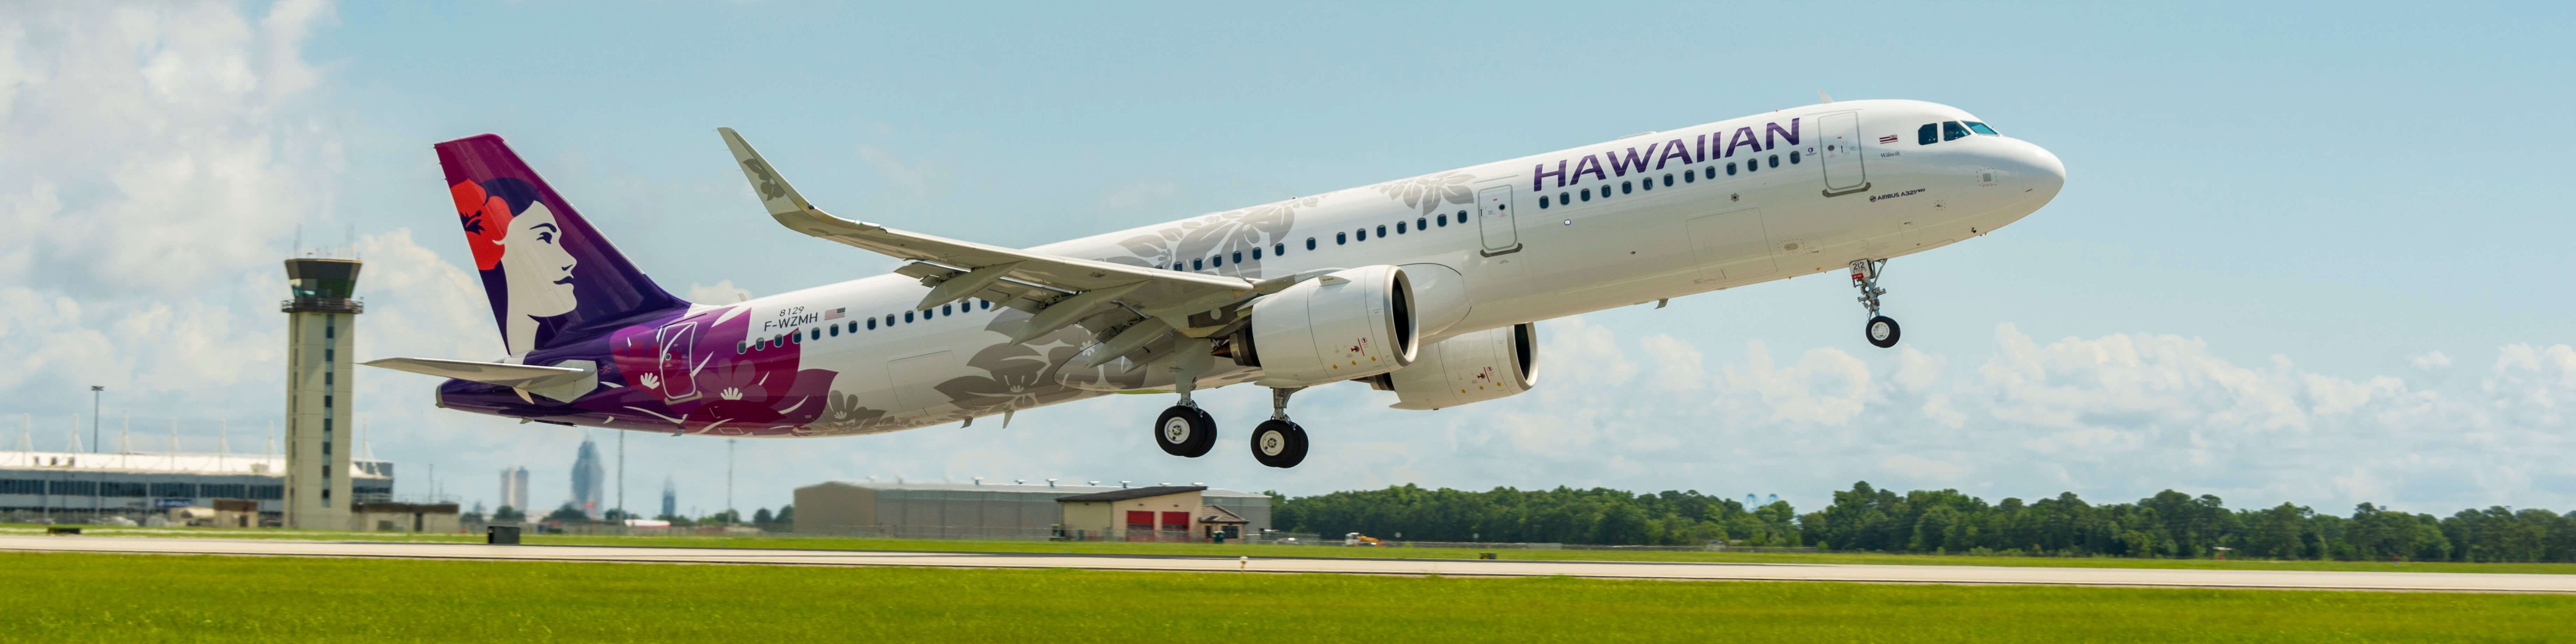 Hawaiian Airlines receives its first U.S.-produced aircraft